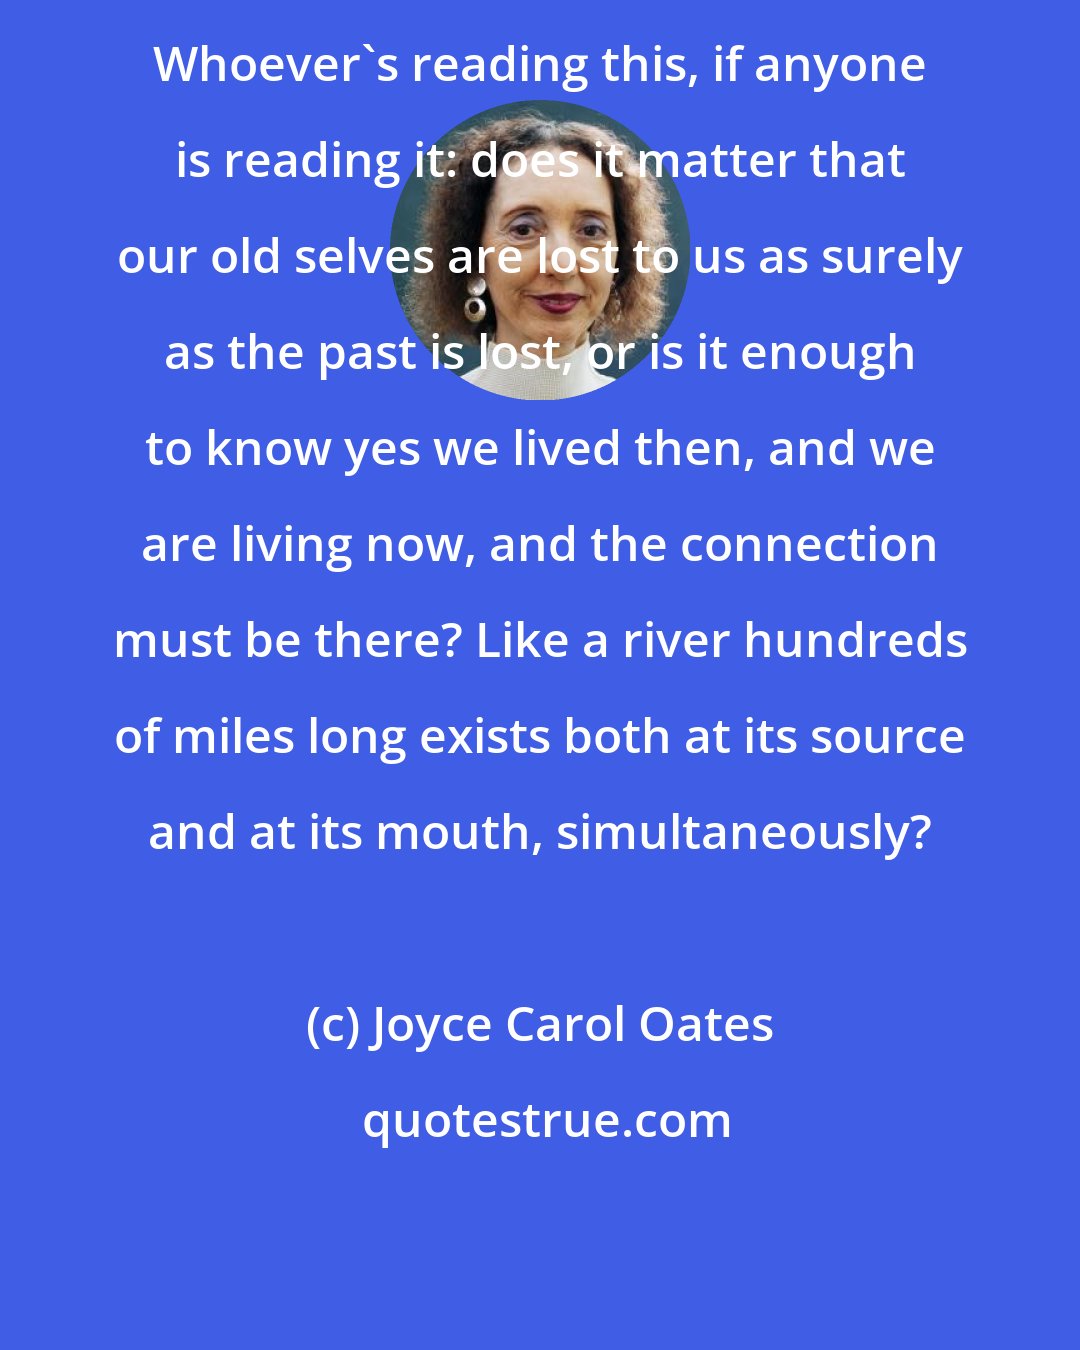 Joyce Carol Oates: Whoever's reading this, if anyone is reading it: does it matter that our old selves are lost to us as surely as the past is lost, or is it enough to know yes we lived then, and we are living now, and the connection must be there? Like a river hundreds of miles long exists both at its source and at its mouth, simultaneously?